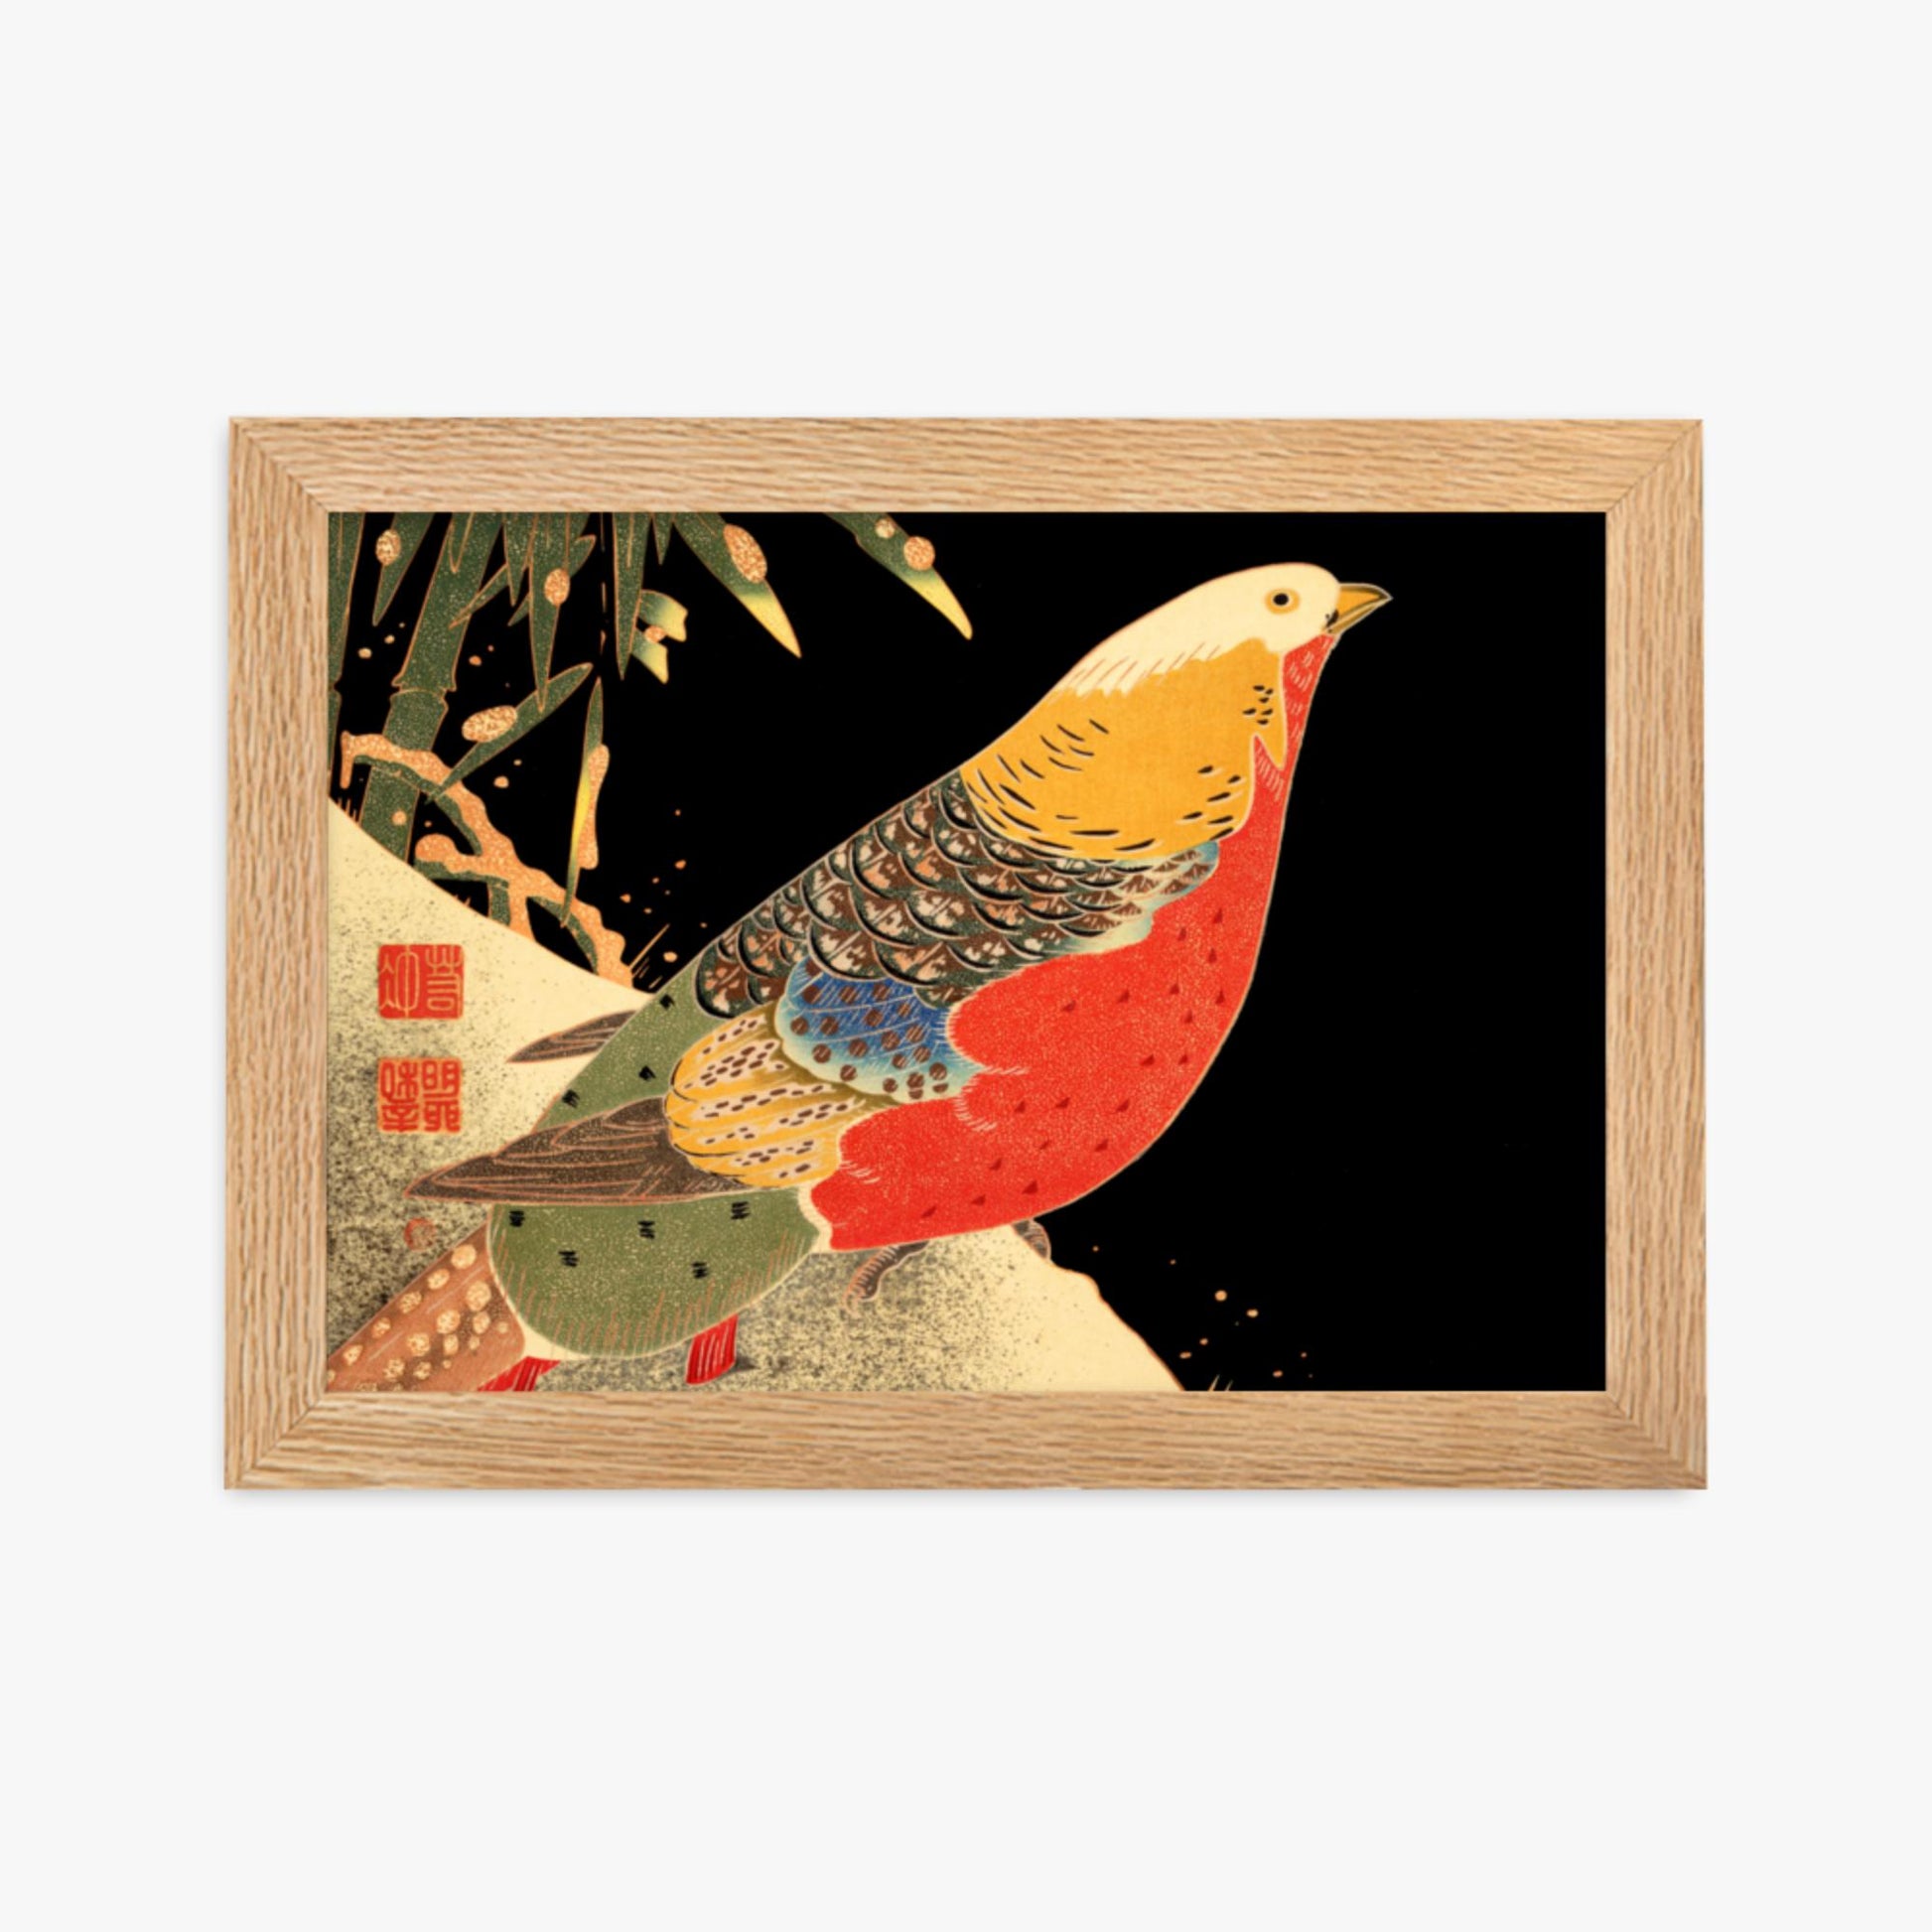 Ito Jakuchu - Golden Pheasant in the Snow 21x30 cm Poster With Oak Frame